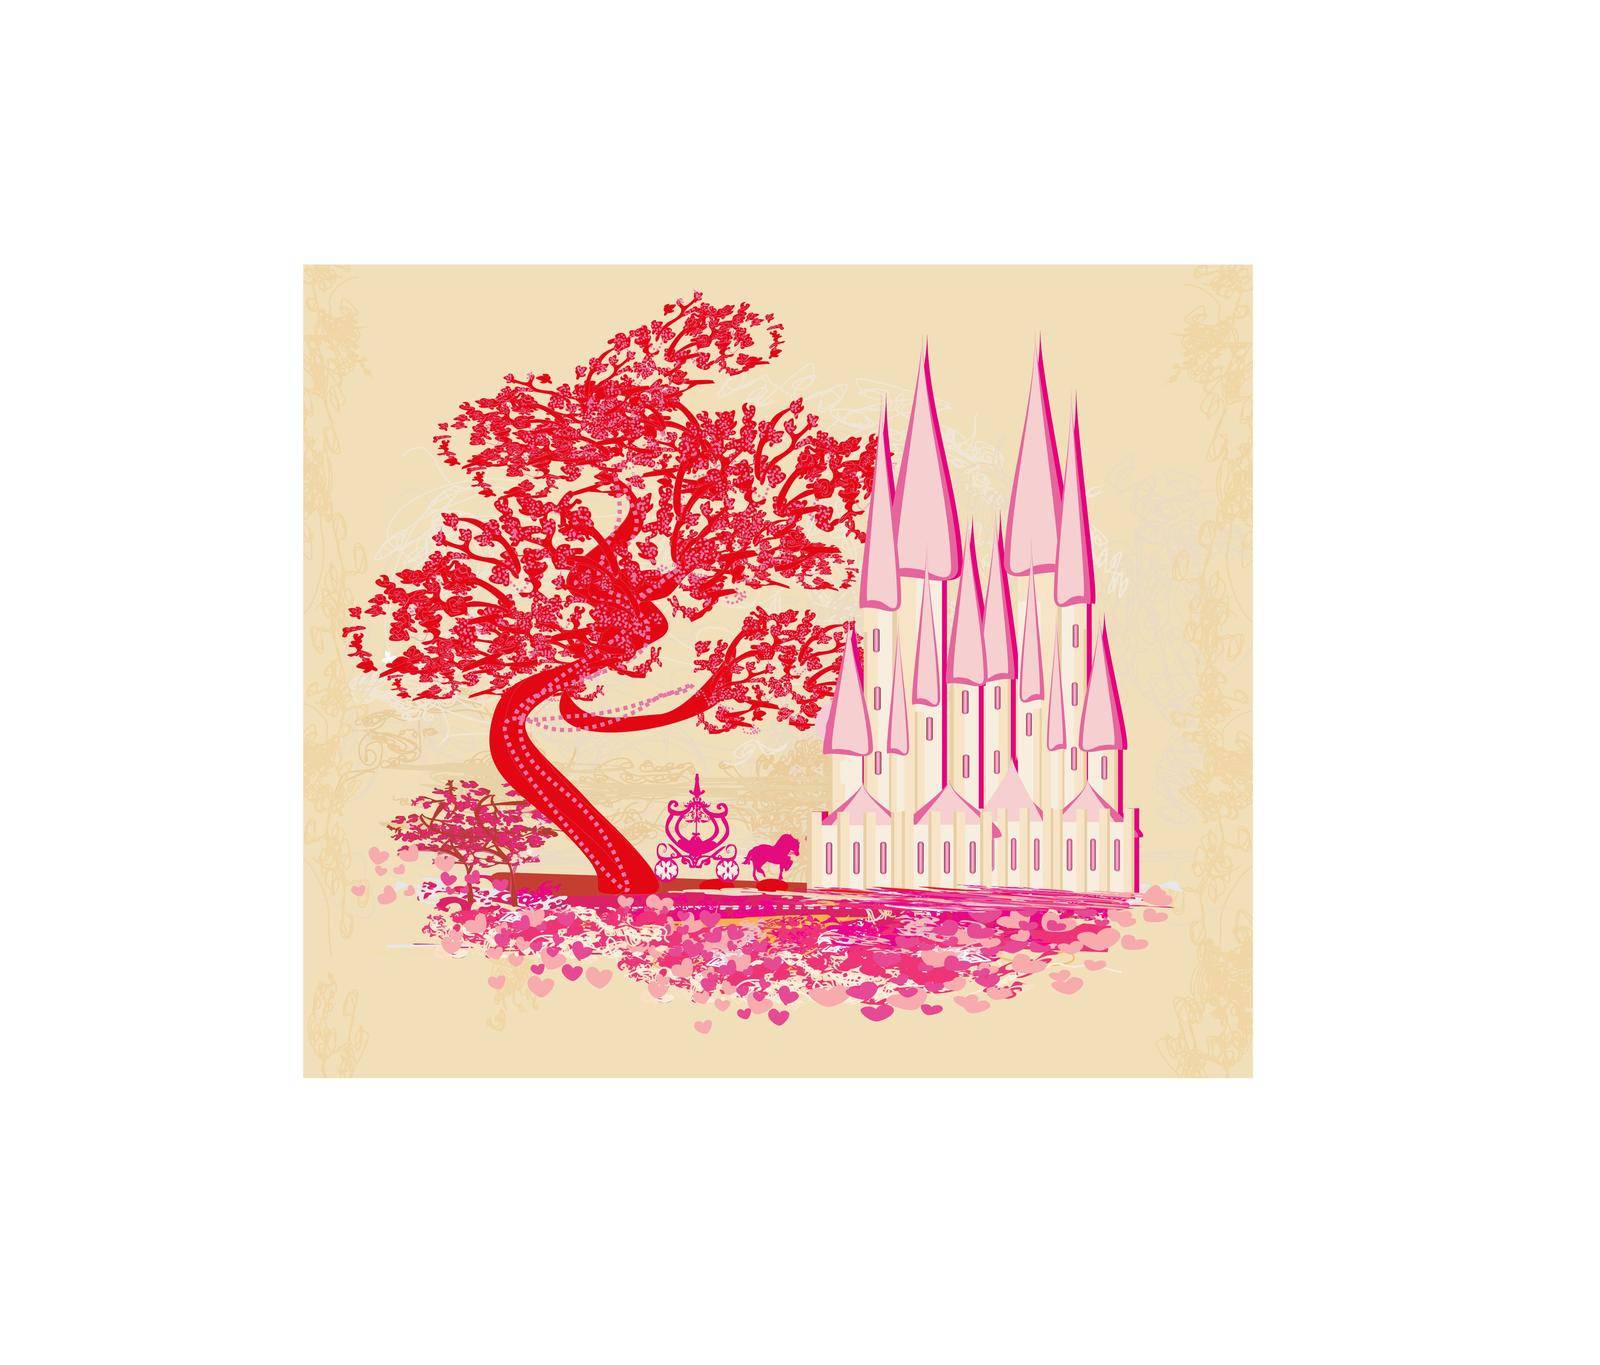 Horse carriage and a medieval castle - pink card by JackyBrown